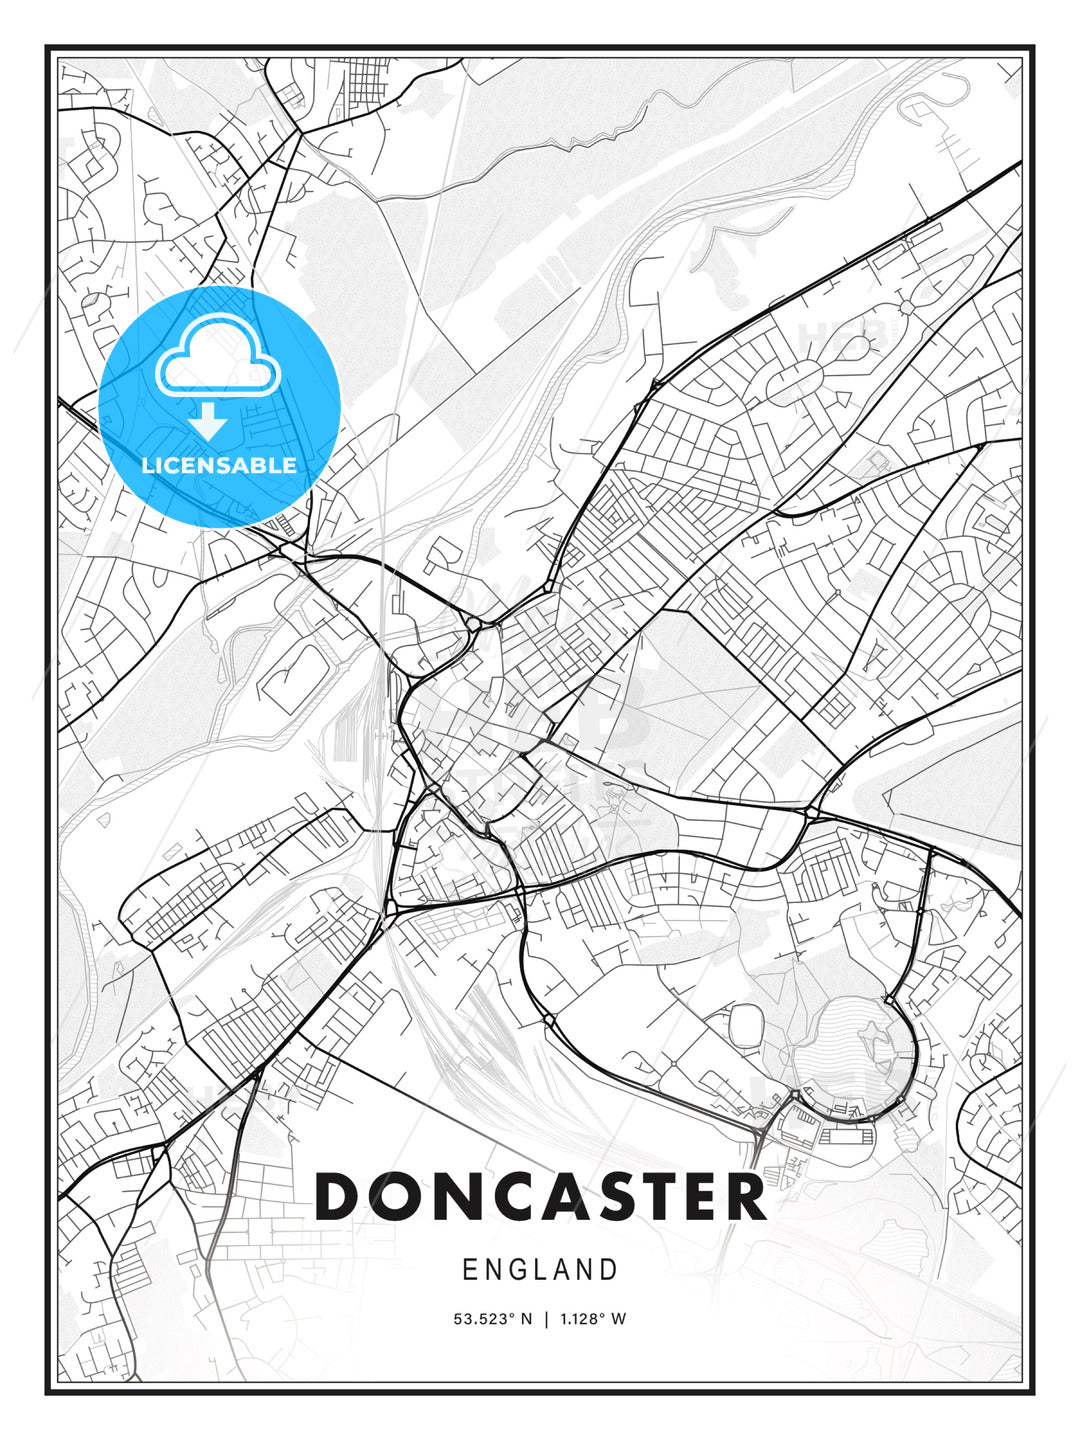 Doncaster, England, Modern Print Template in Various Formats - HEBSTREITS Sketches